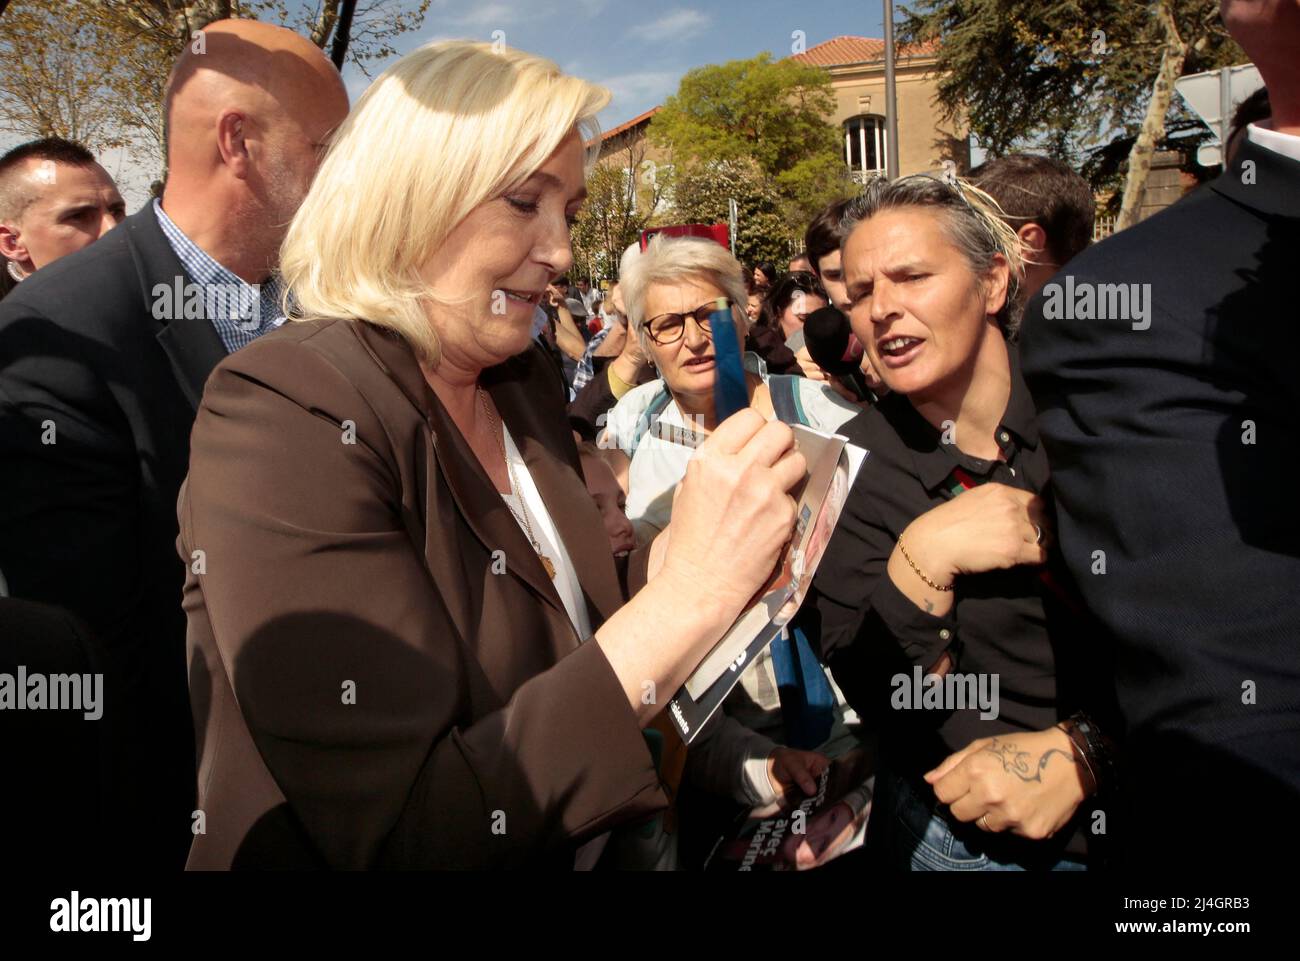 Pertuis, France. 15th Apr 2022. Demonstrators 'Antifa' argue with French gendarmes during French far-right party Rassemblement National (RN) presidential candidate Marine Le Pen visit at Pertuis' market, as part of a campaign visit in Pertuis , southern France on April 15, 2022.Marine Le Pen will face French President and liberal party La Republique en Marche (LREM) candidate for re-election Emmanuel Macron in a run-off vote on April 24, 2022, after first round voting on April 10. Photo by Patrick Aventurier/ABACAPRESS.COM Credit: Abaca Press/Alamy Live News Stock Photo